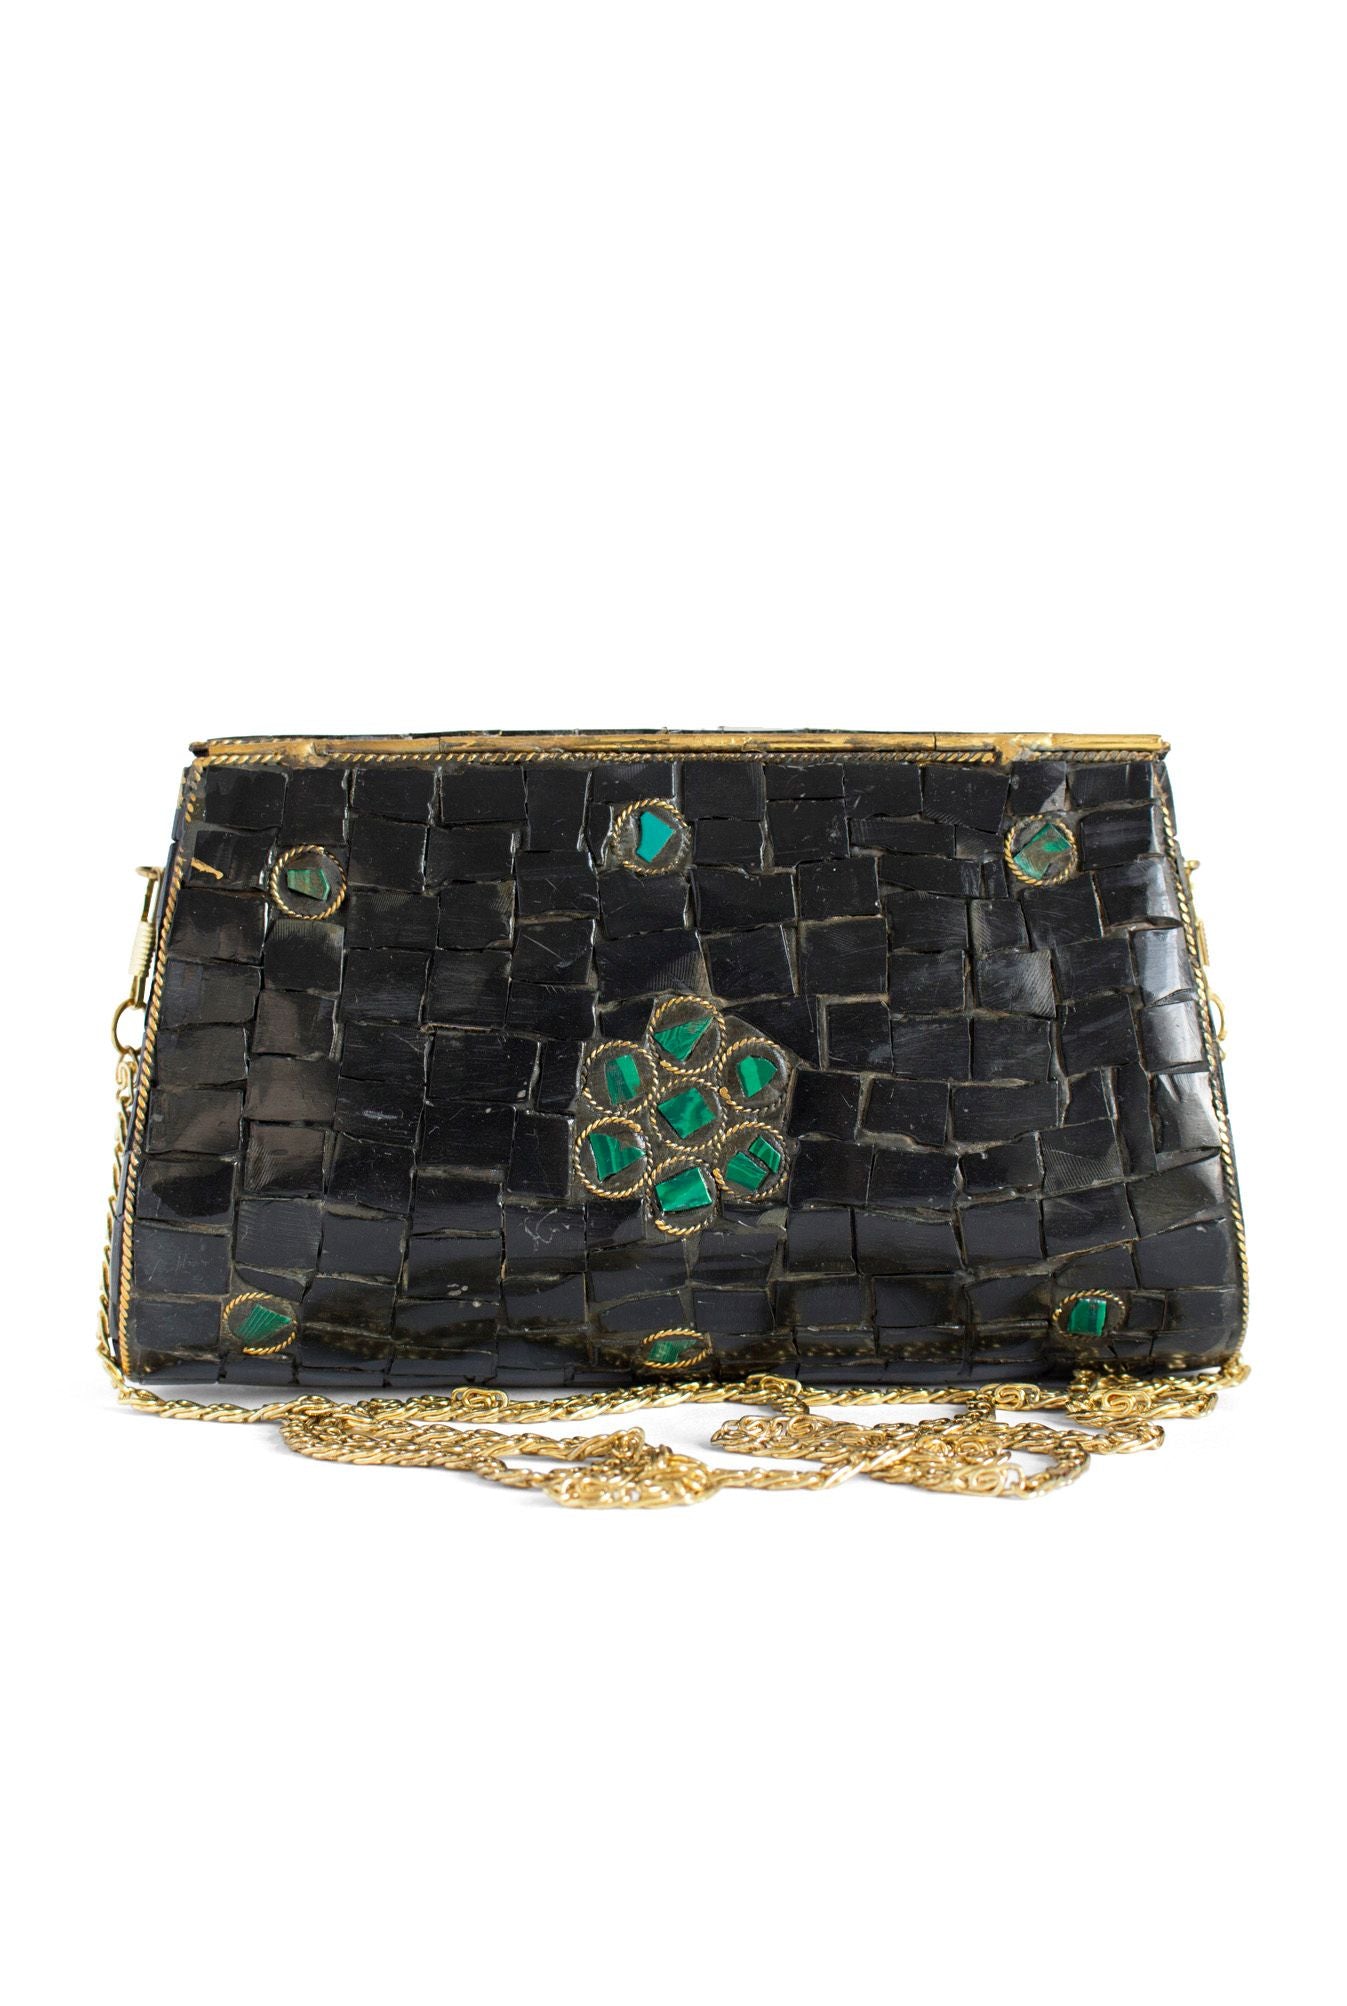 Green and Black Stone with Brass Inlay Bespoke Purse